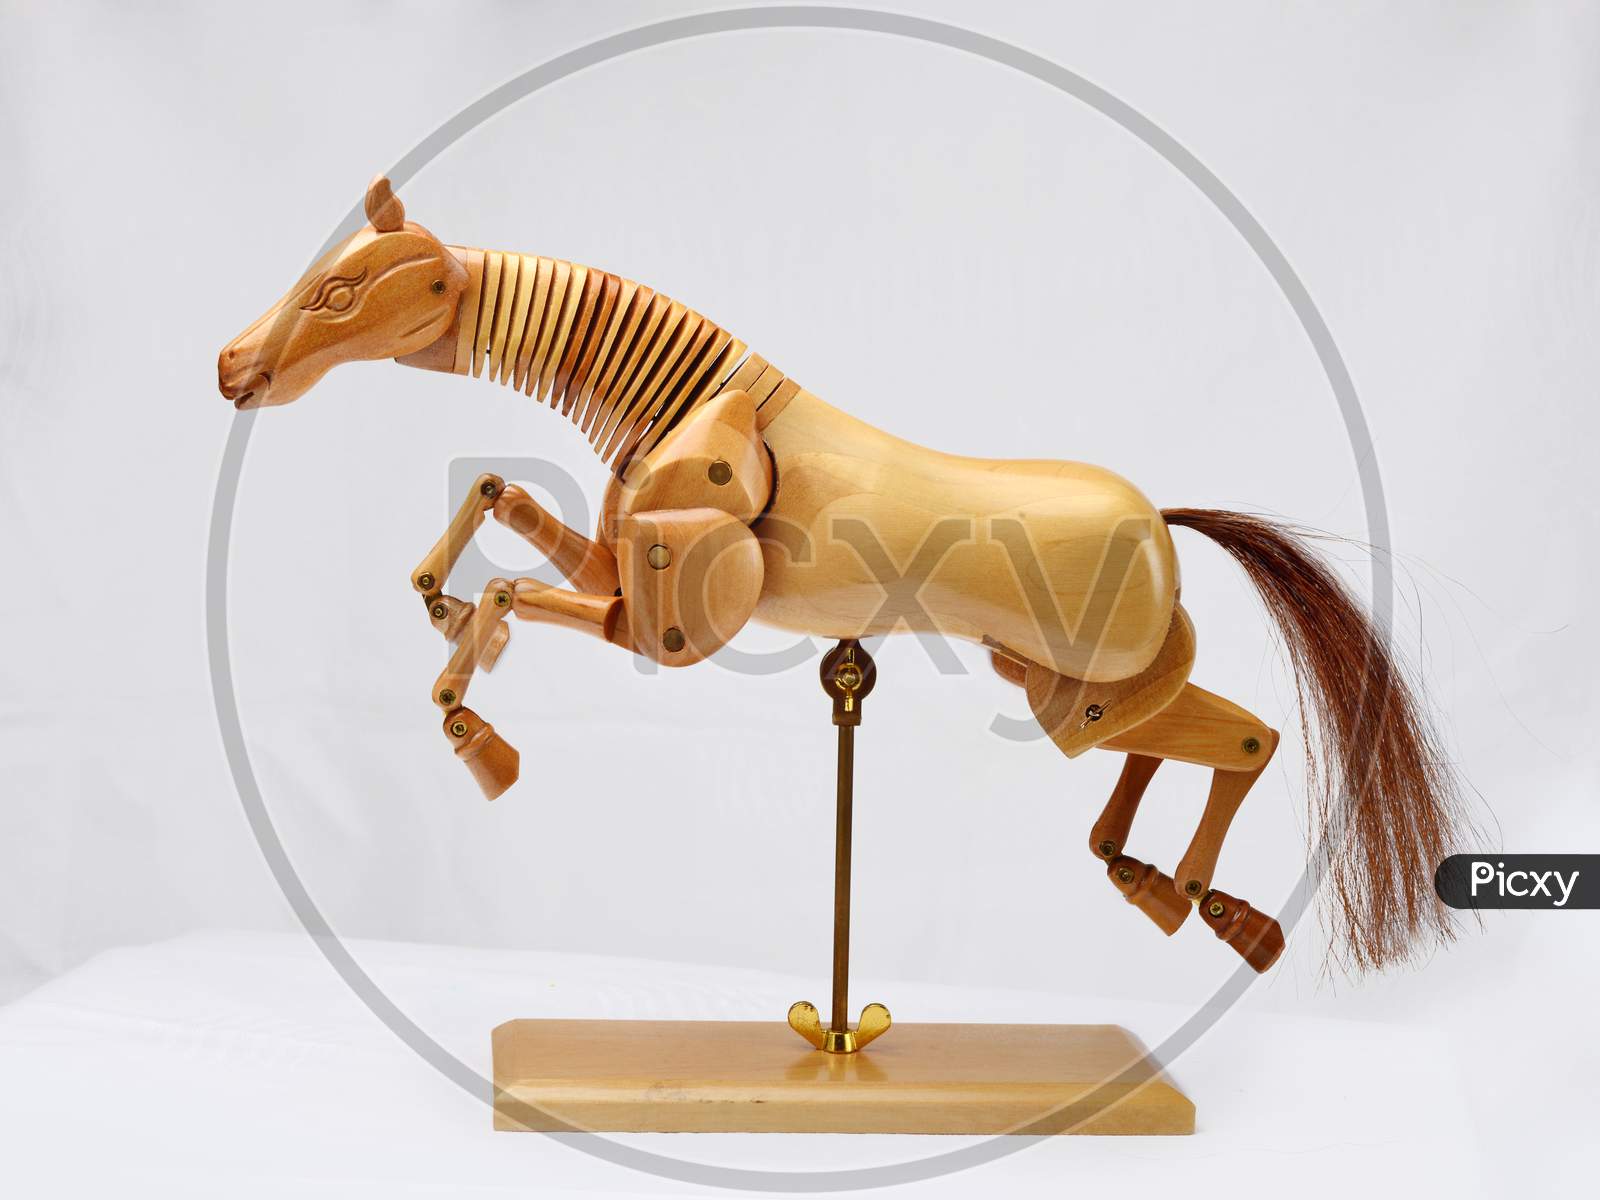 Wooden articulated horse dummy for drawing lessons